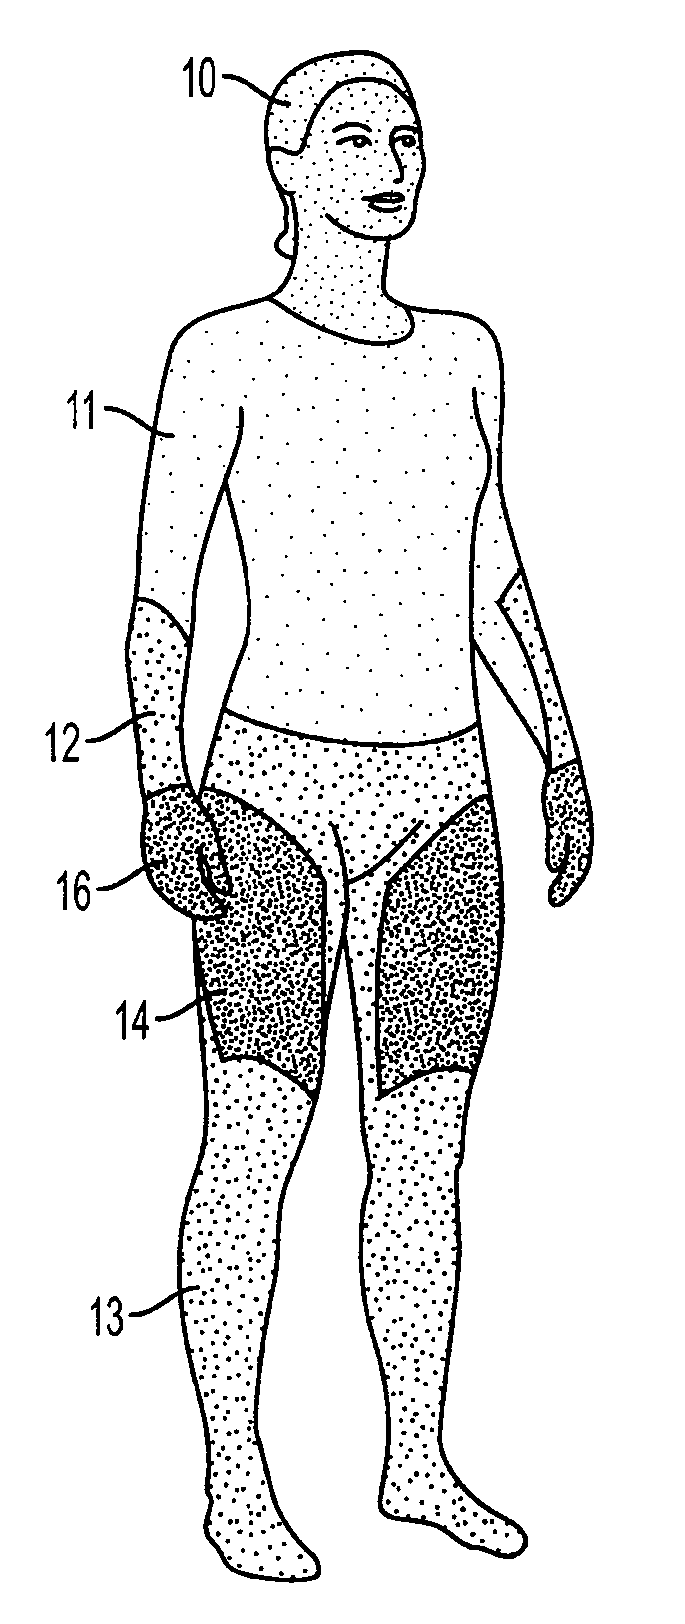 Articles Of Base Layer Apparel Including Zones Having Different Thermal Properties